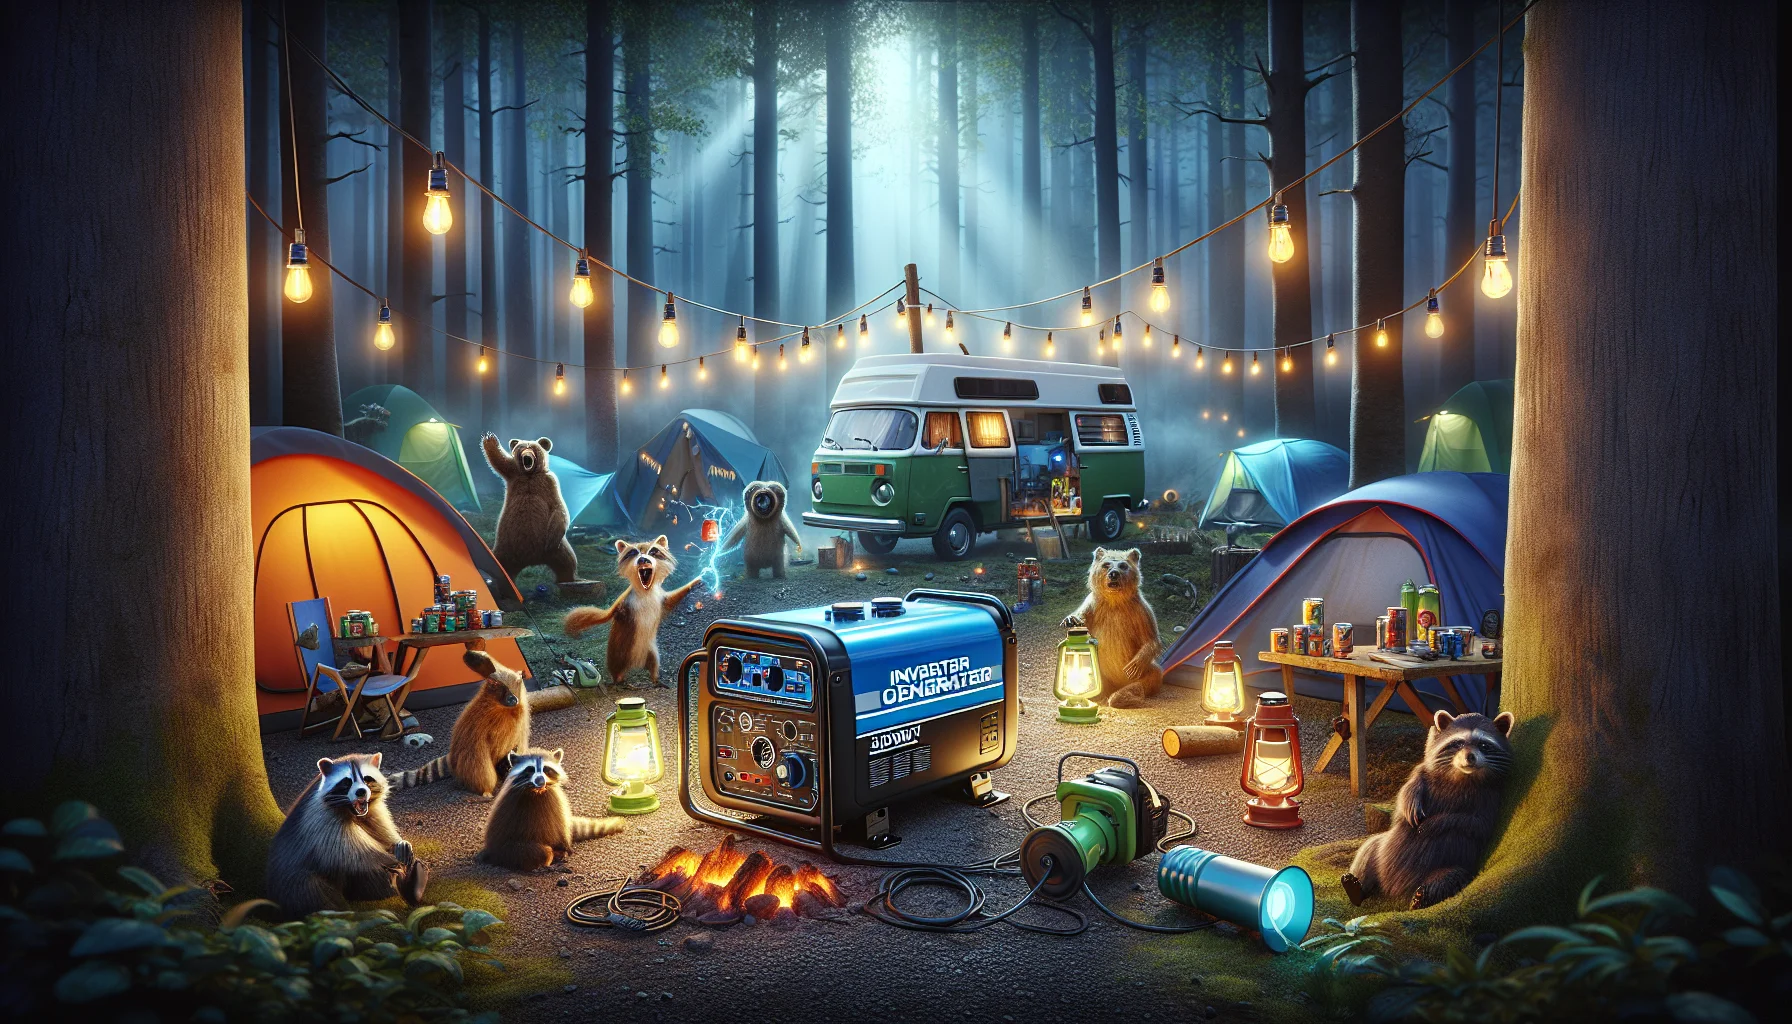 Create a humorous and captivating scene featuring an inverter generator of 3000 watt. The generator is situated in an outdoor campsite. Around it, an array of camping equipment such as lanterns, tents, and a camper van have been amusingly hooked up, all bursting in radiant colors powered by the generator. In the background, an eerie, dim forest humorously contrasts with the brightly lit campsite. To further enhance the hilarity, a group of forest animals - a bear, a raccoon, and an owl are depicted huddled around the generator, with wide-eyed expressions, seemingly in awe of the technology. The scene aims to evoke emotions of joy and amazement, promoting the idea of generating electricity even in the middle of a forest.